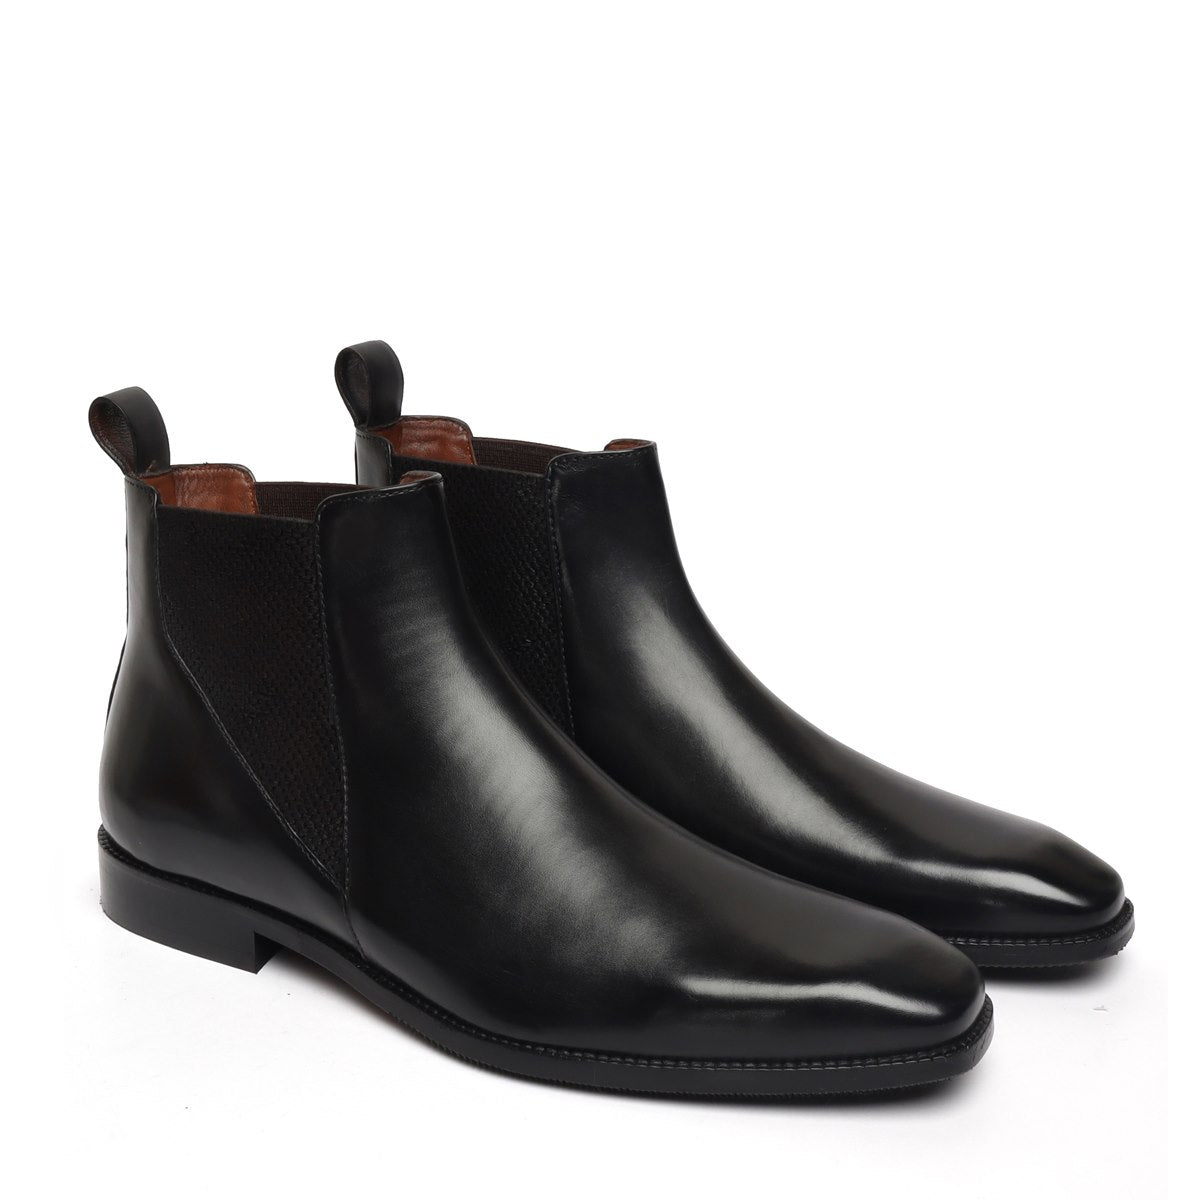 New shape Black Leather Chelsea Boot by Brune & Bareskin with a Stylis